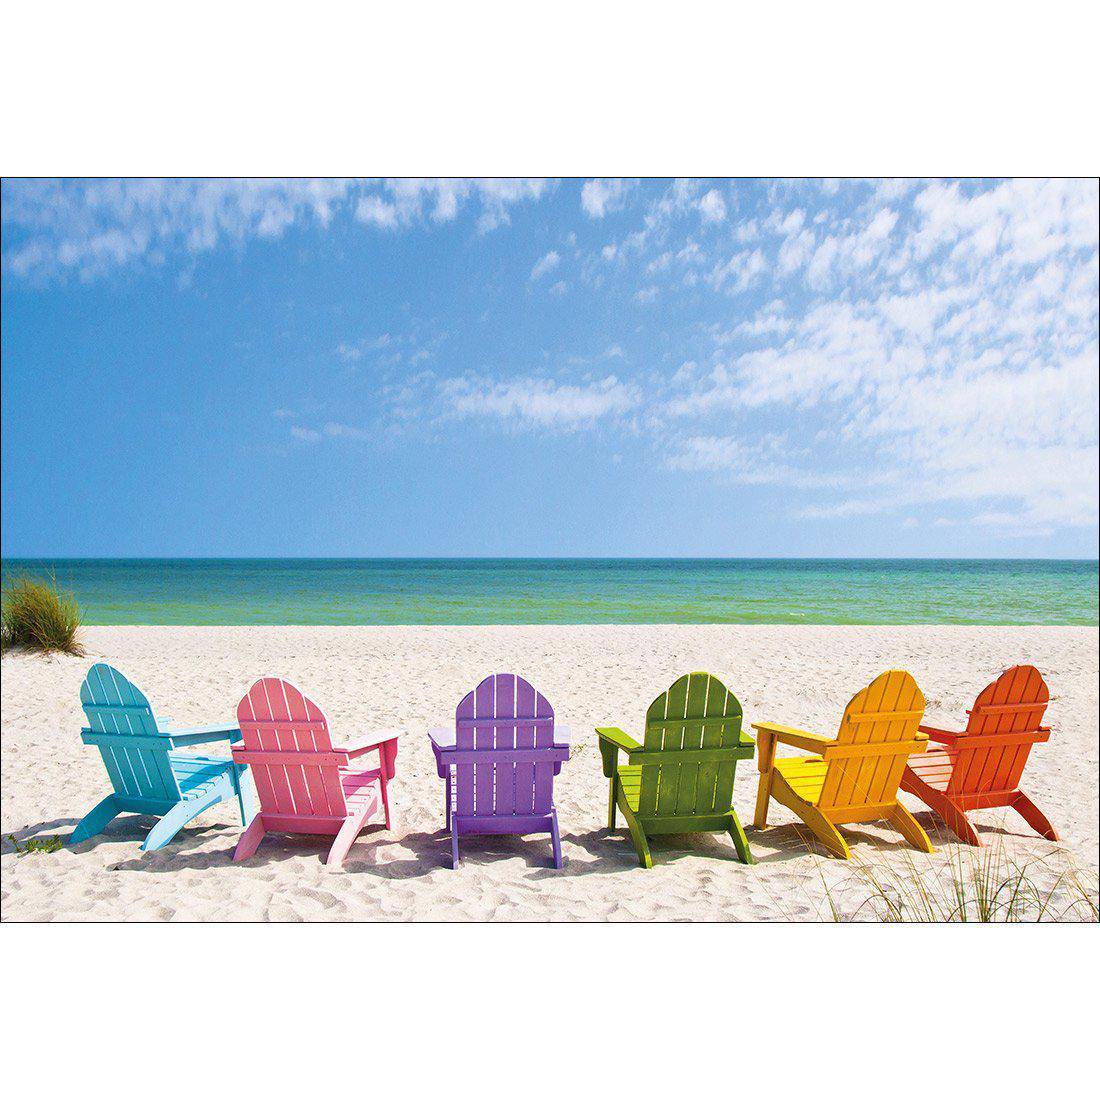 Pastel Chairs Canvas Art-Canvas-Wall Art Designs-45x30cm-Canvas - No Frame-Wall Art Designs